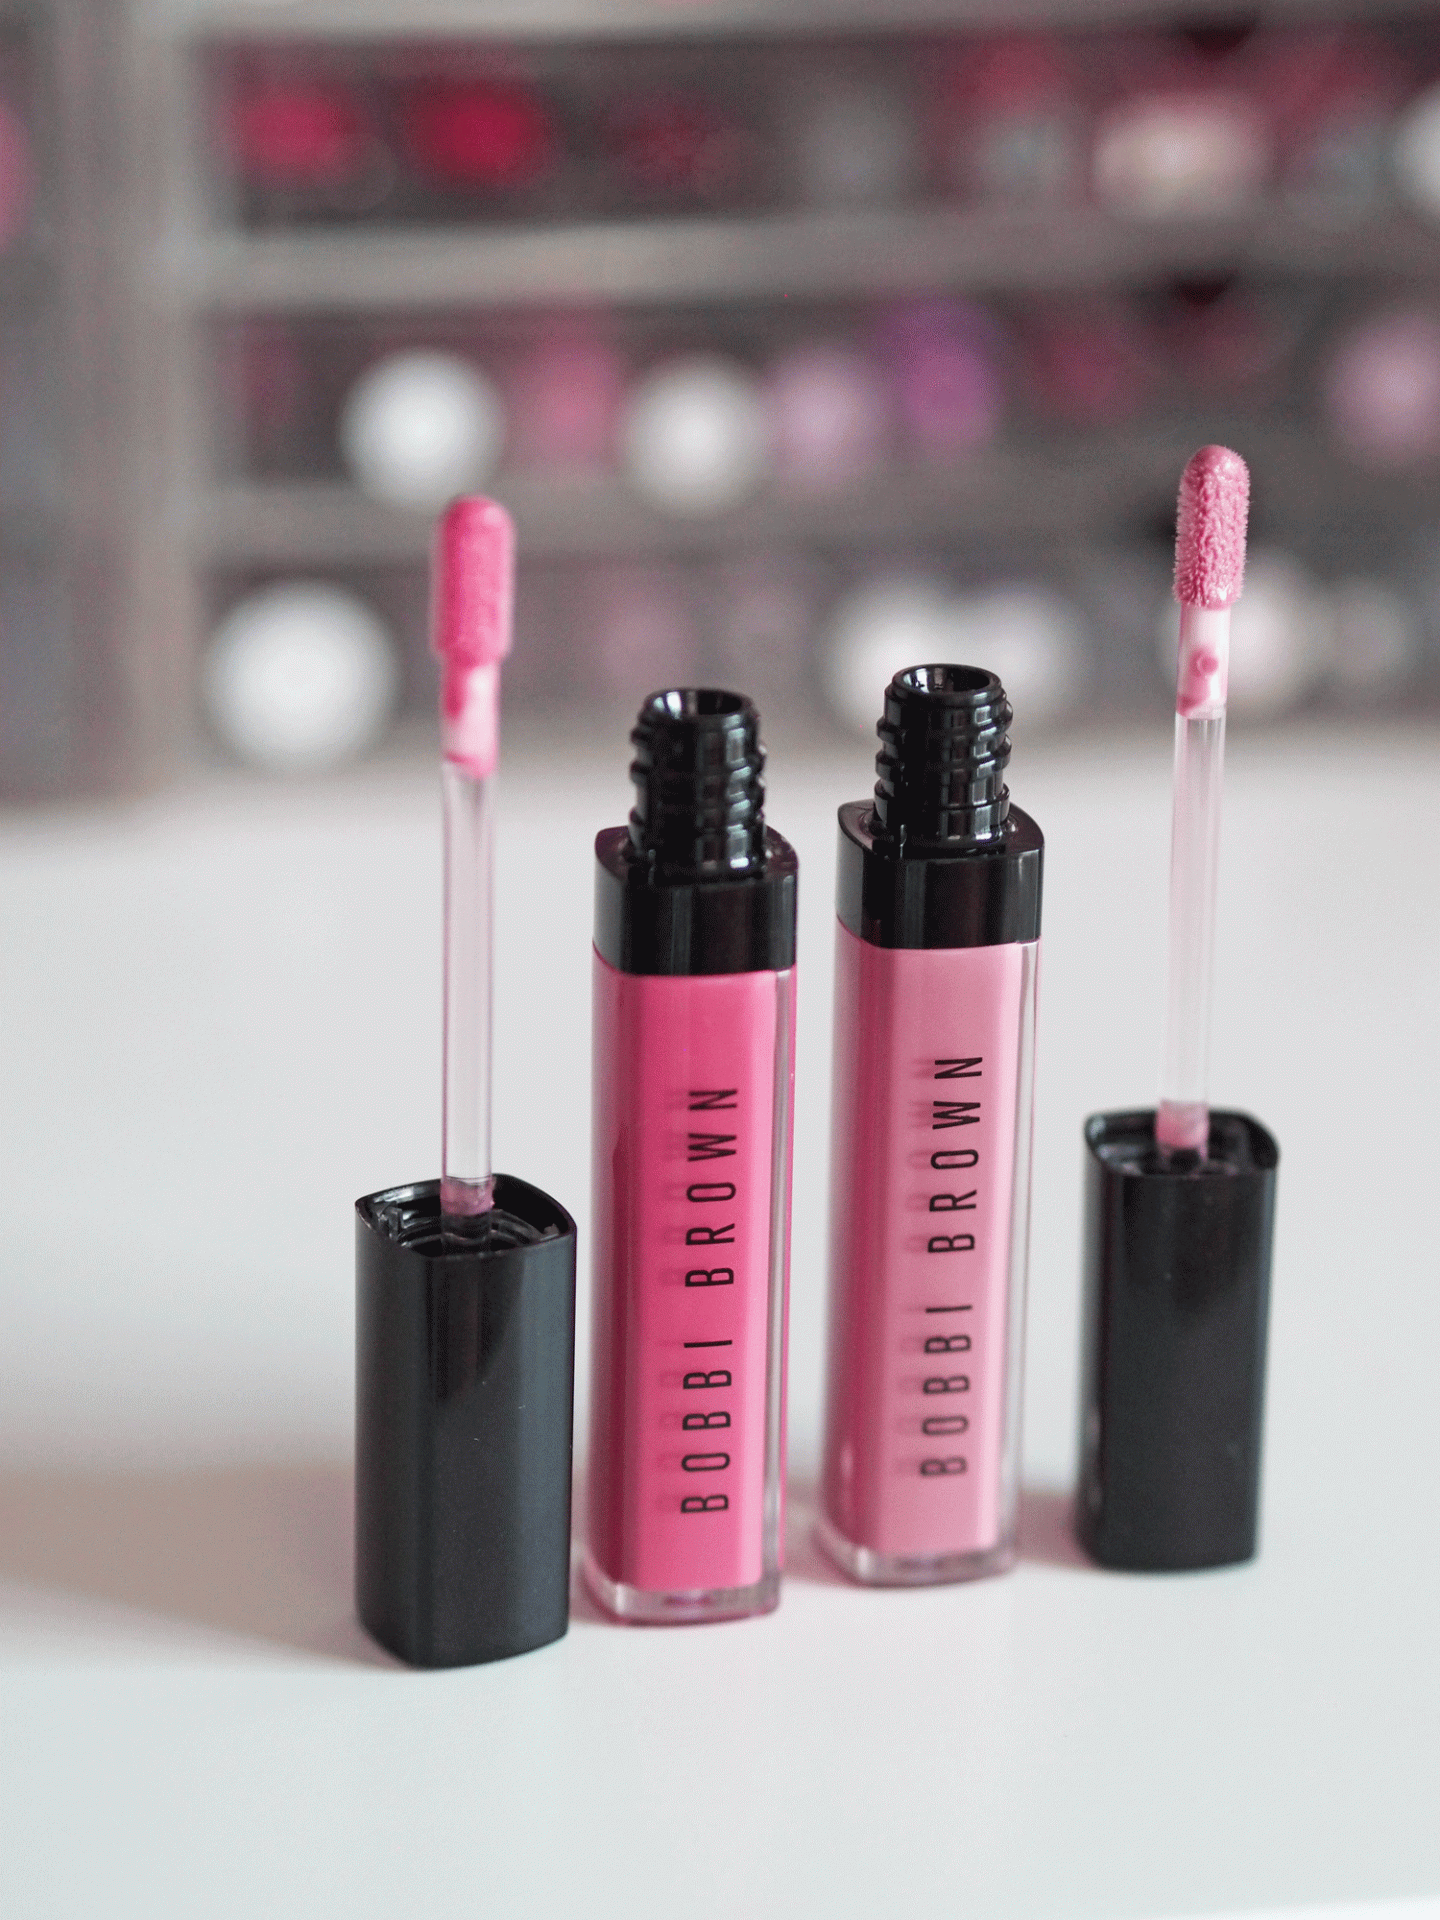 Bobbi brown crushed oil infused gloss review and swatches